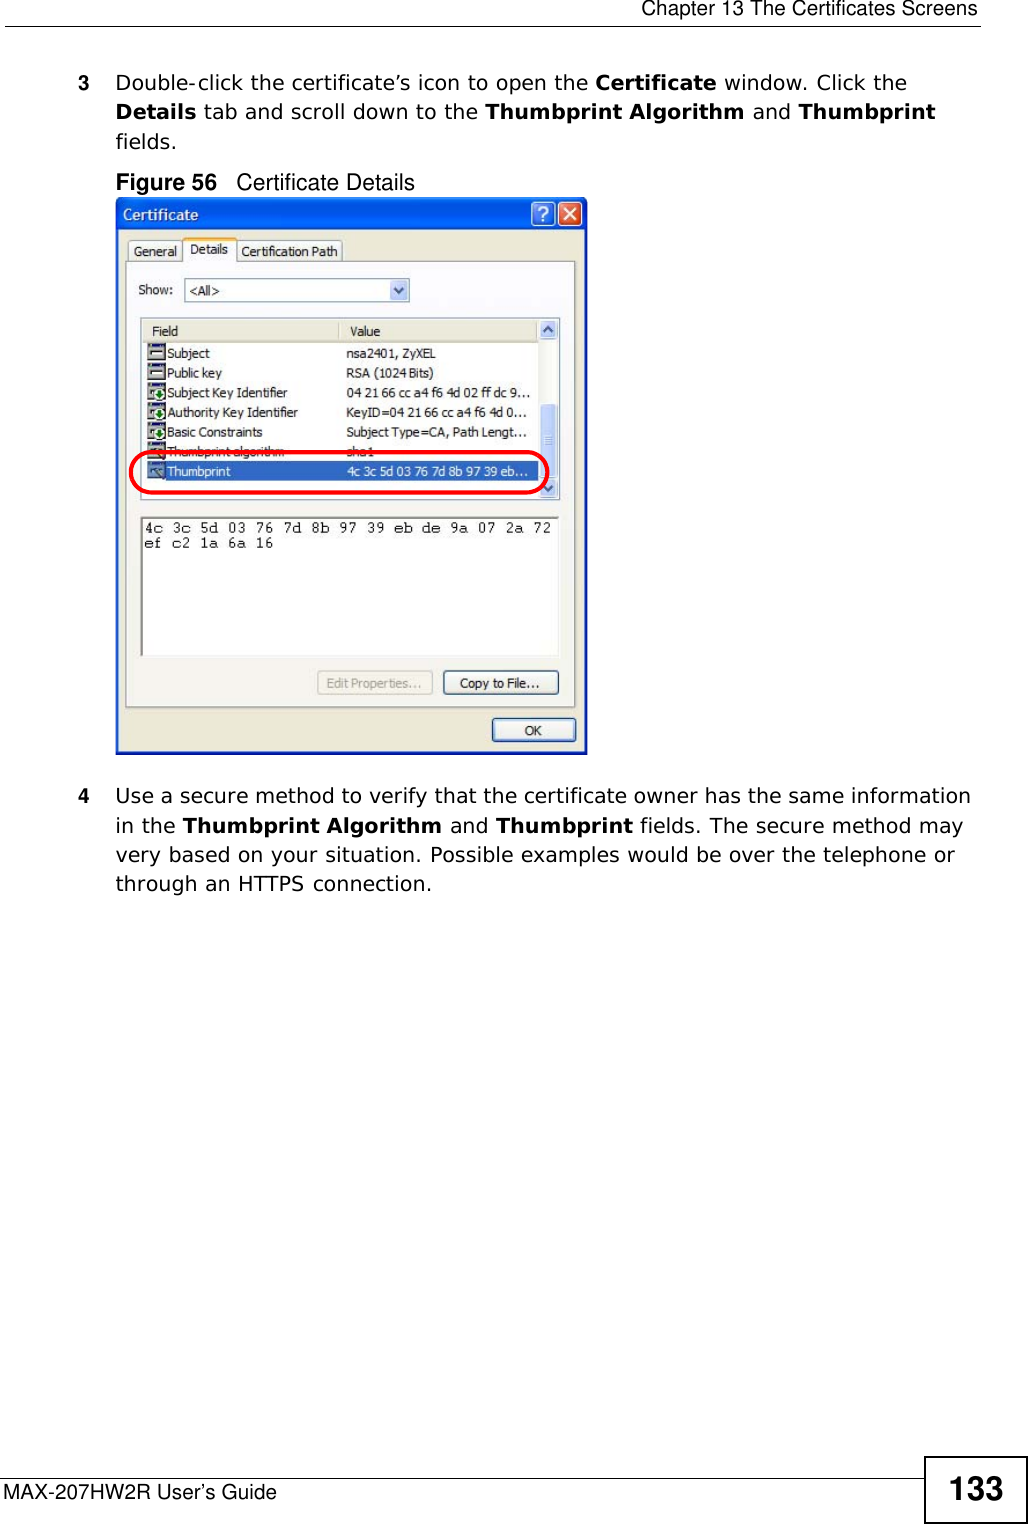  Chapter 13 The Certificates ScreensMAX-207HW2R User’s Guide 1333Double-click the certificate’s icon to open the Certificate window. Click the Details tab and scroll down to the Thumbprint Algorithm and Thumbprint fields.Figure 56   Certificate Details 4Use a secure method to verify that the certificate owner has the same information in the Thumbprint Algorithm and Thumbprint fields. The secure method may very based on your situation. Possible examples would be over the telephone or through an HTTPS connection. 